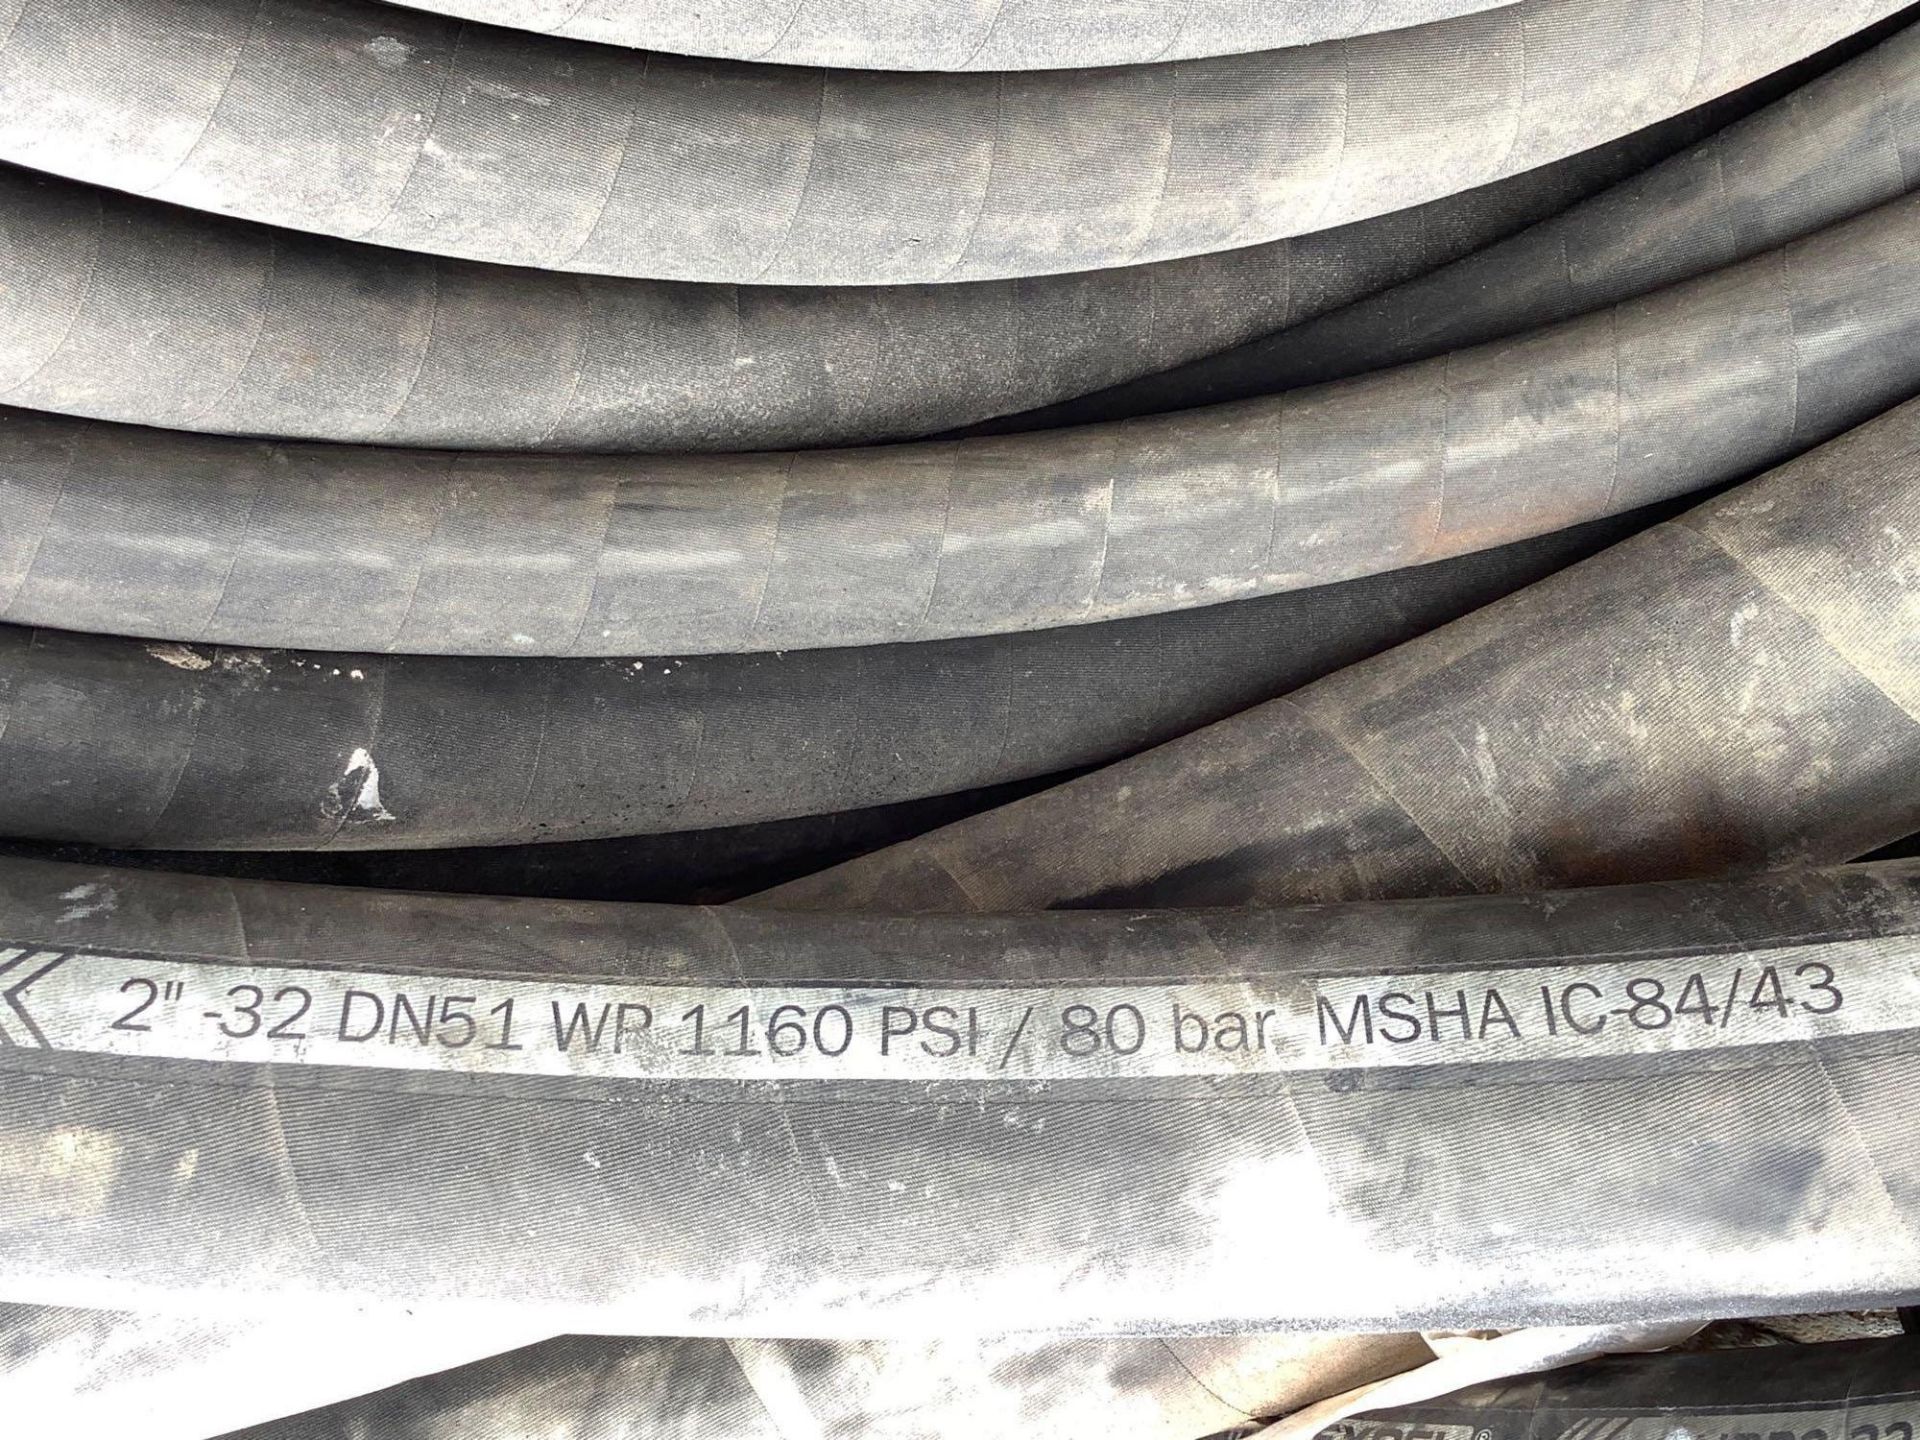 INDUSTRIAL HOSE, APPROX 2”-32 DN51 - Image 2 of 5